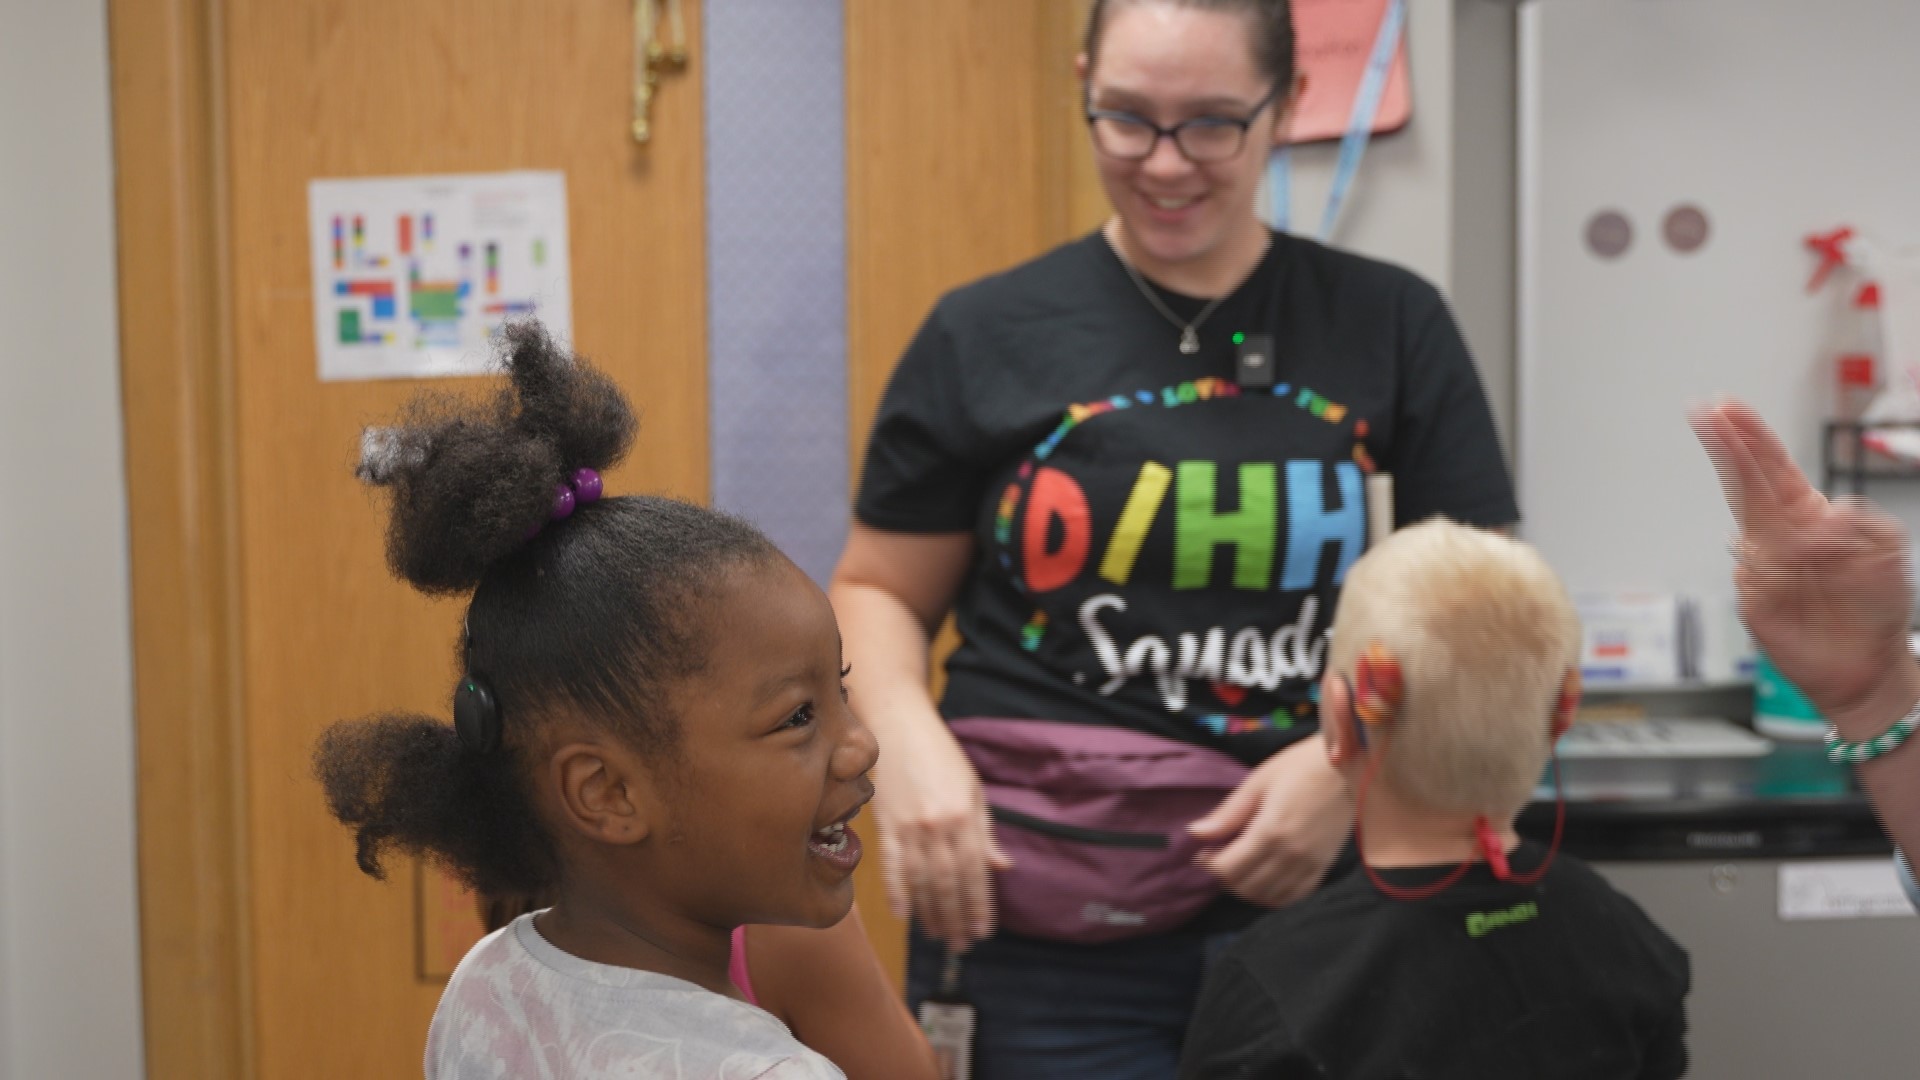 A program brand new to Muskegon County could be a lifeline for a historically underserved group of kids: the deaf and hard-of-hearing.